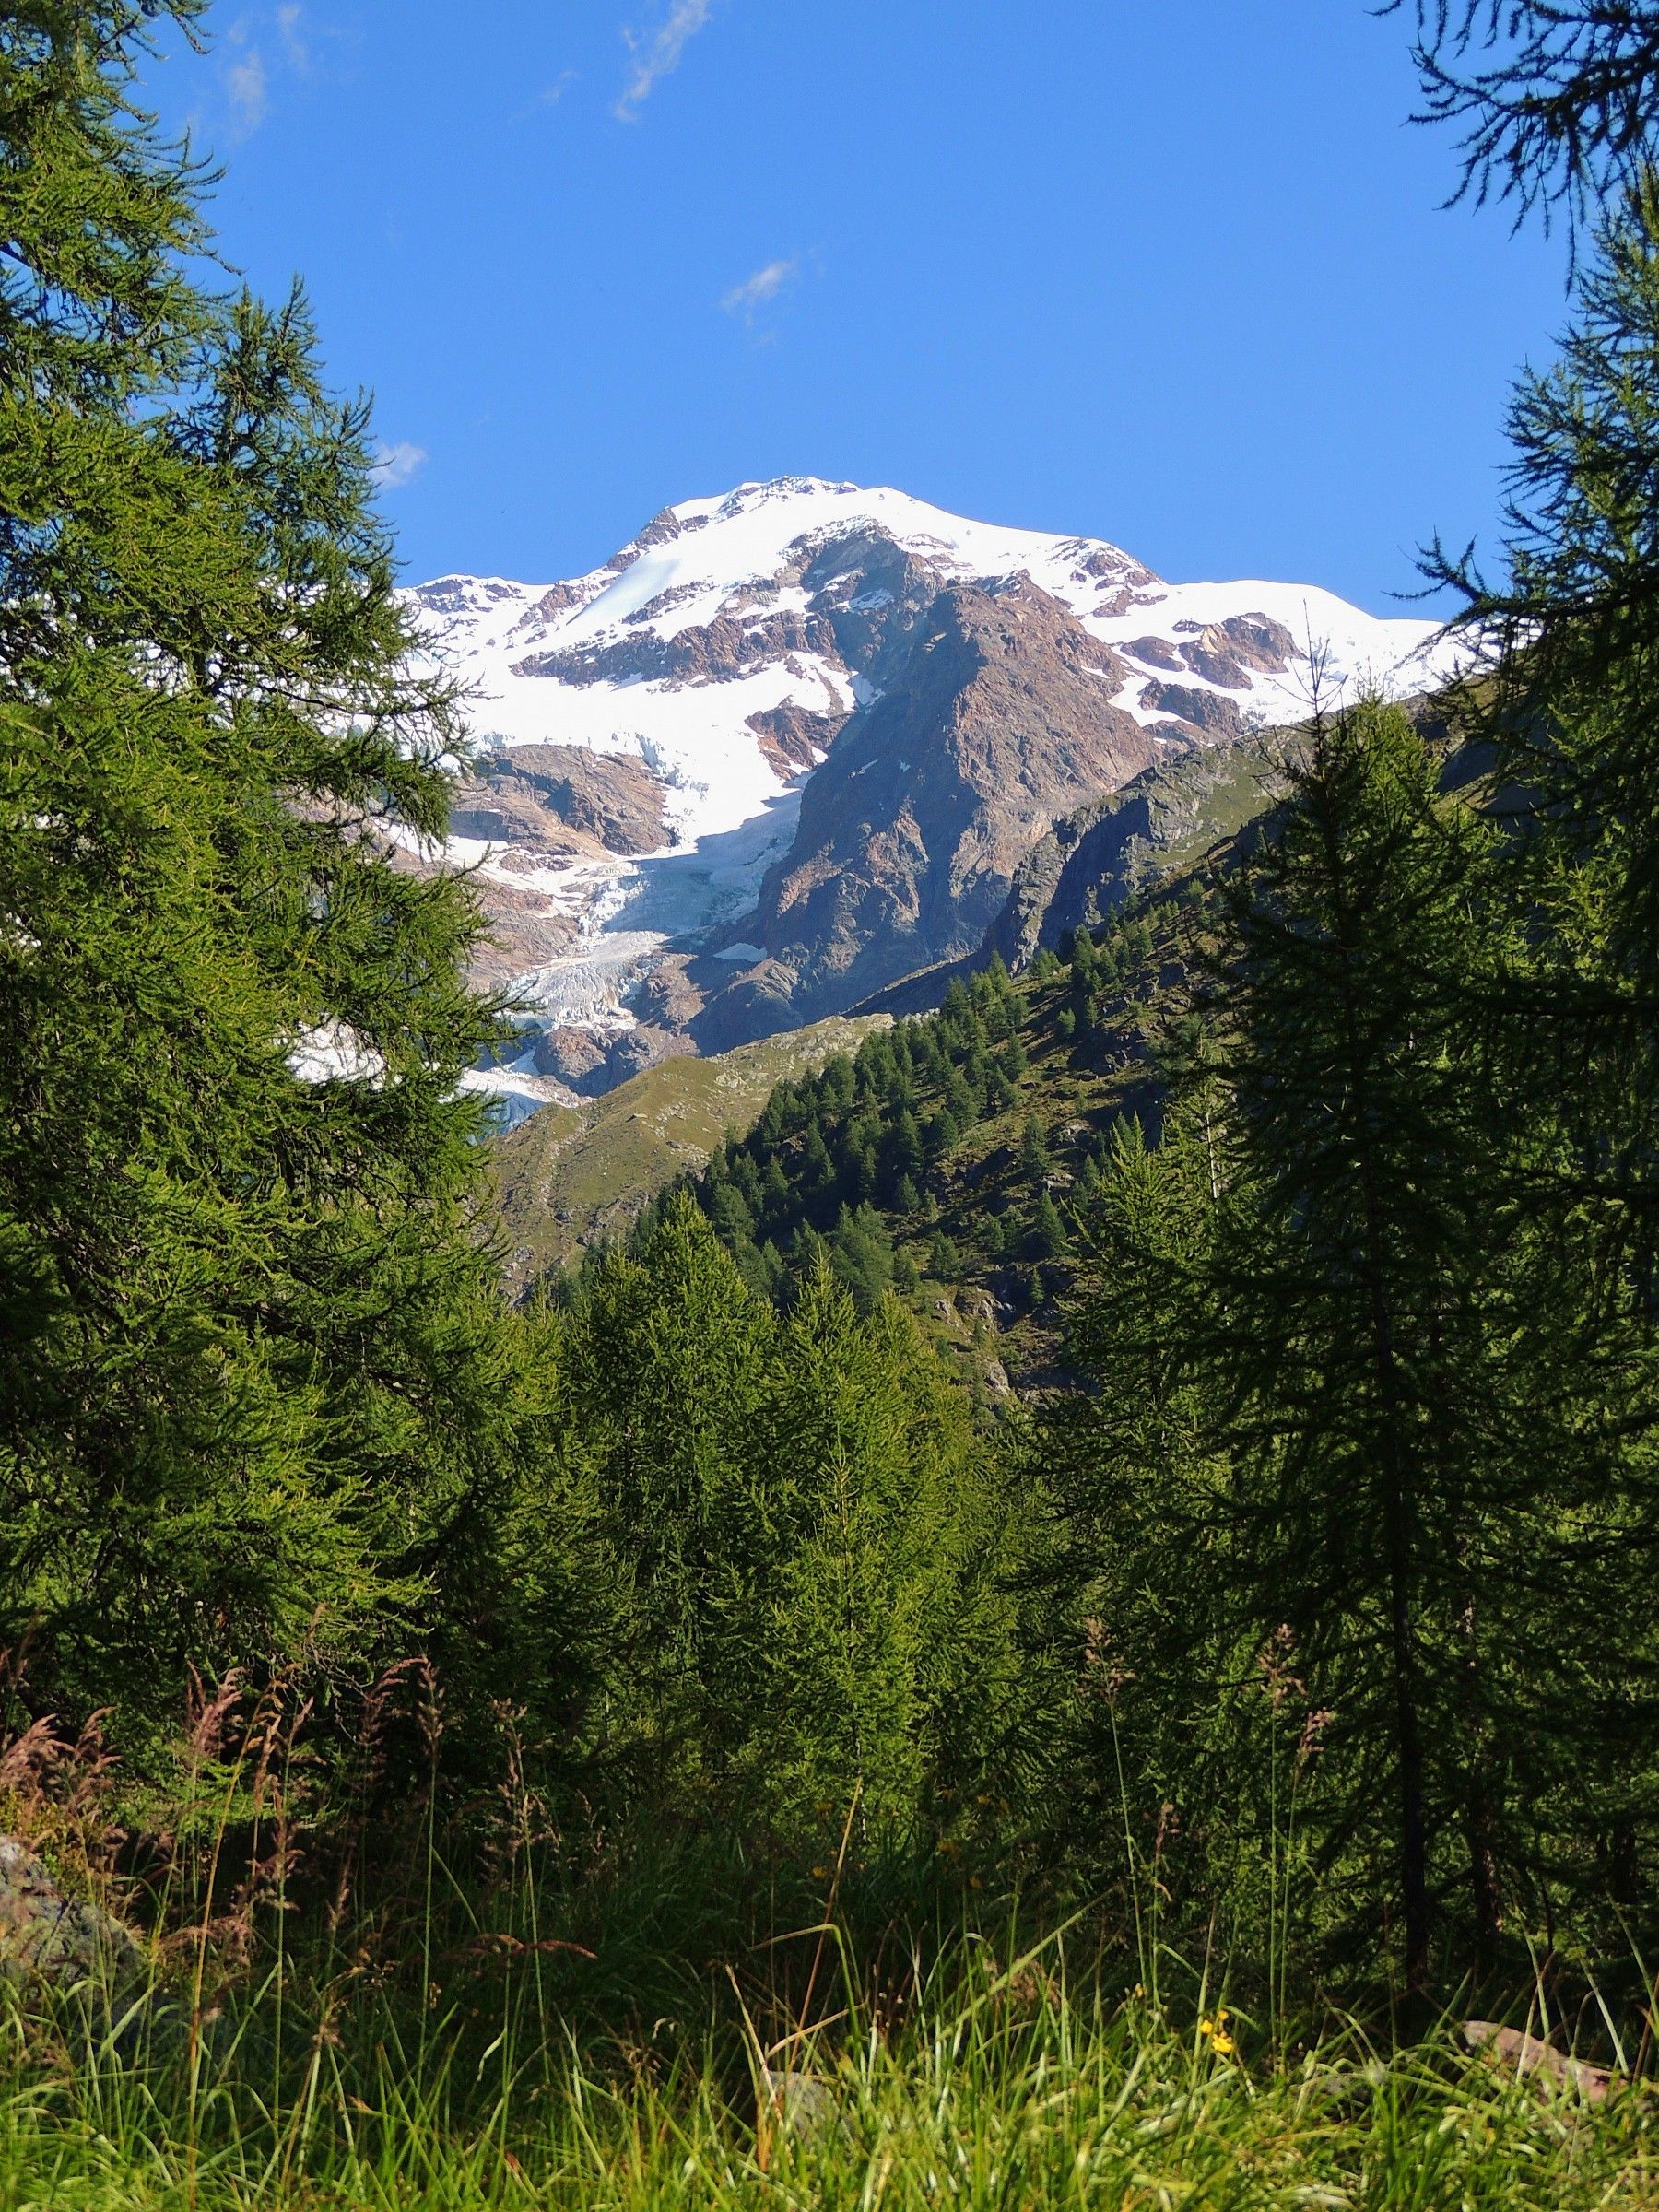 The Monte Rosa and its peaks...